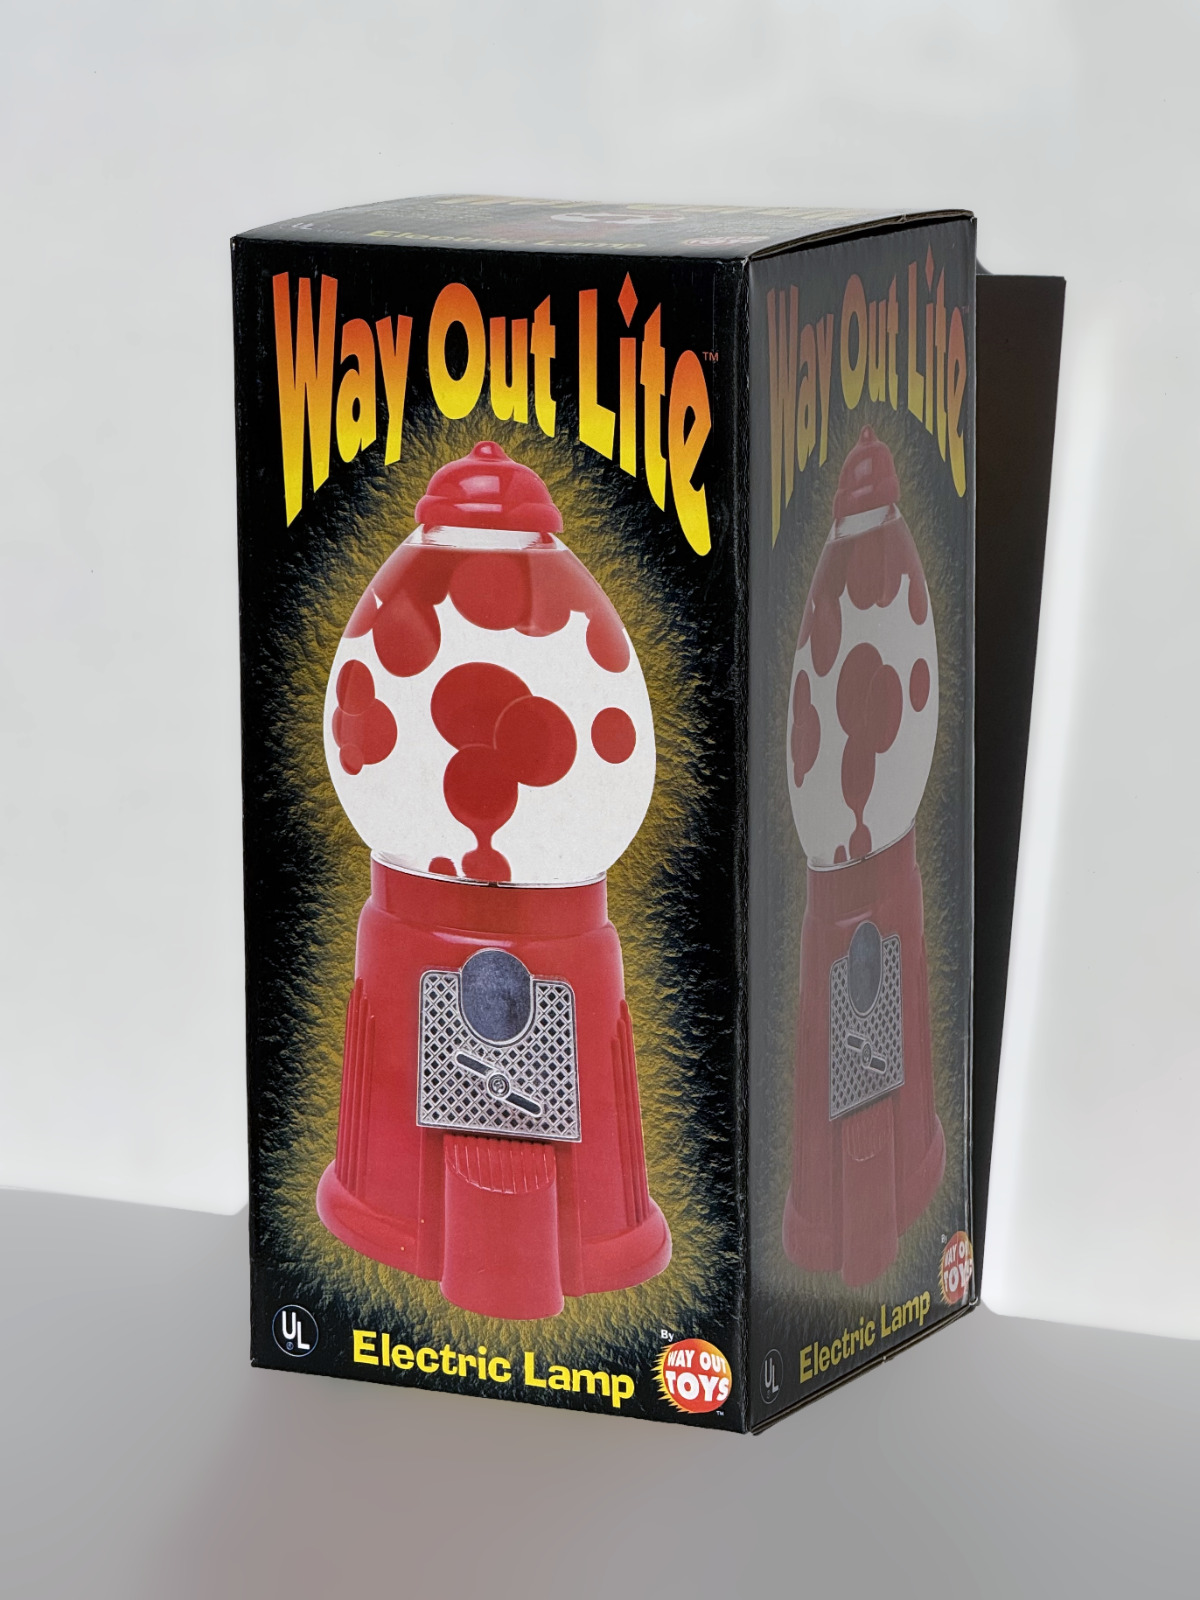 Vintage 1998 Way Out Lite Gumball Lava Lamp - Rare New in Box Condition